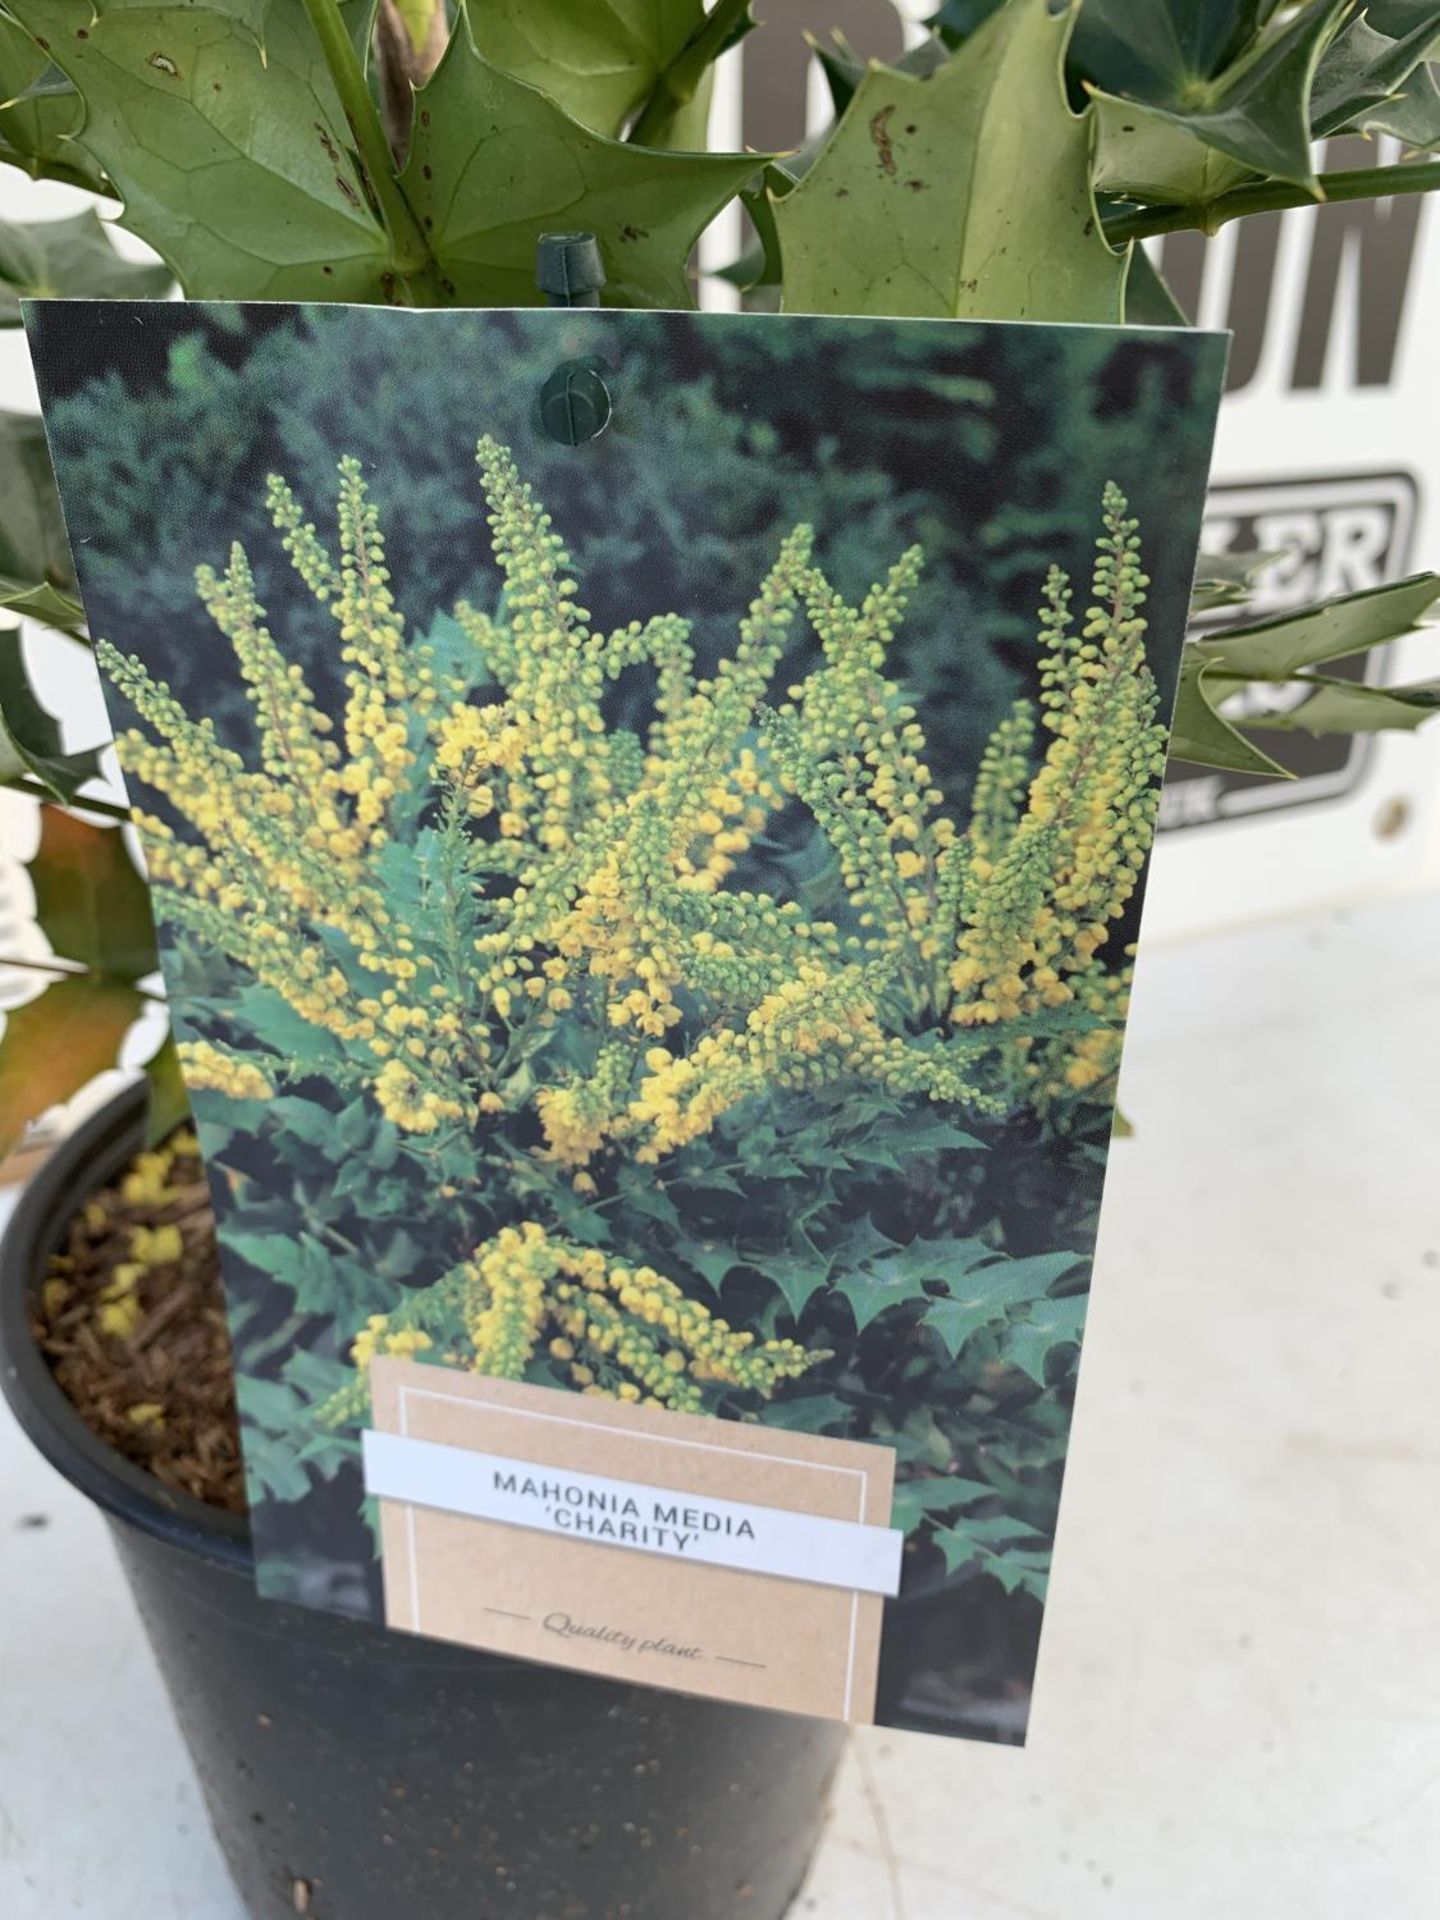 TWO MAHONIA MEDIA 'CHARITY' IN 2 LTR POTS APPROX 60CM IN HEIGHT PLUS VAT TO BE SOLD FOR THE TWO - Image 5 of 5